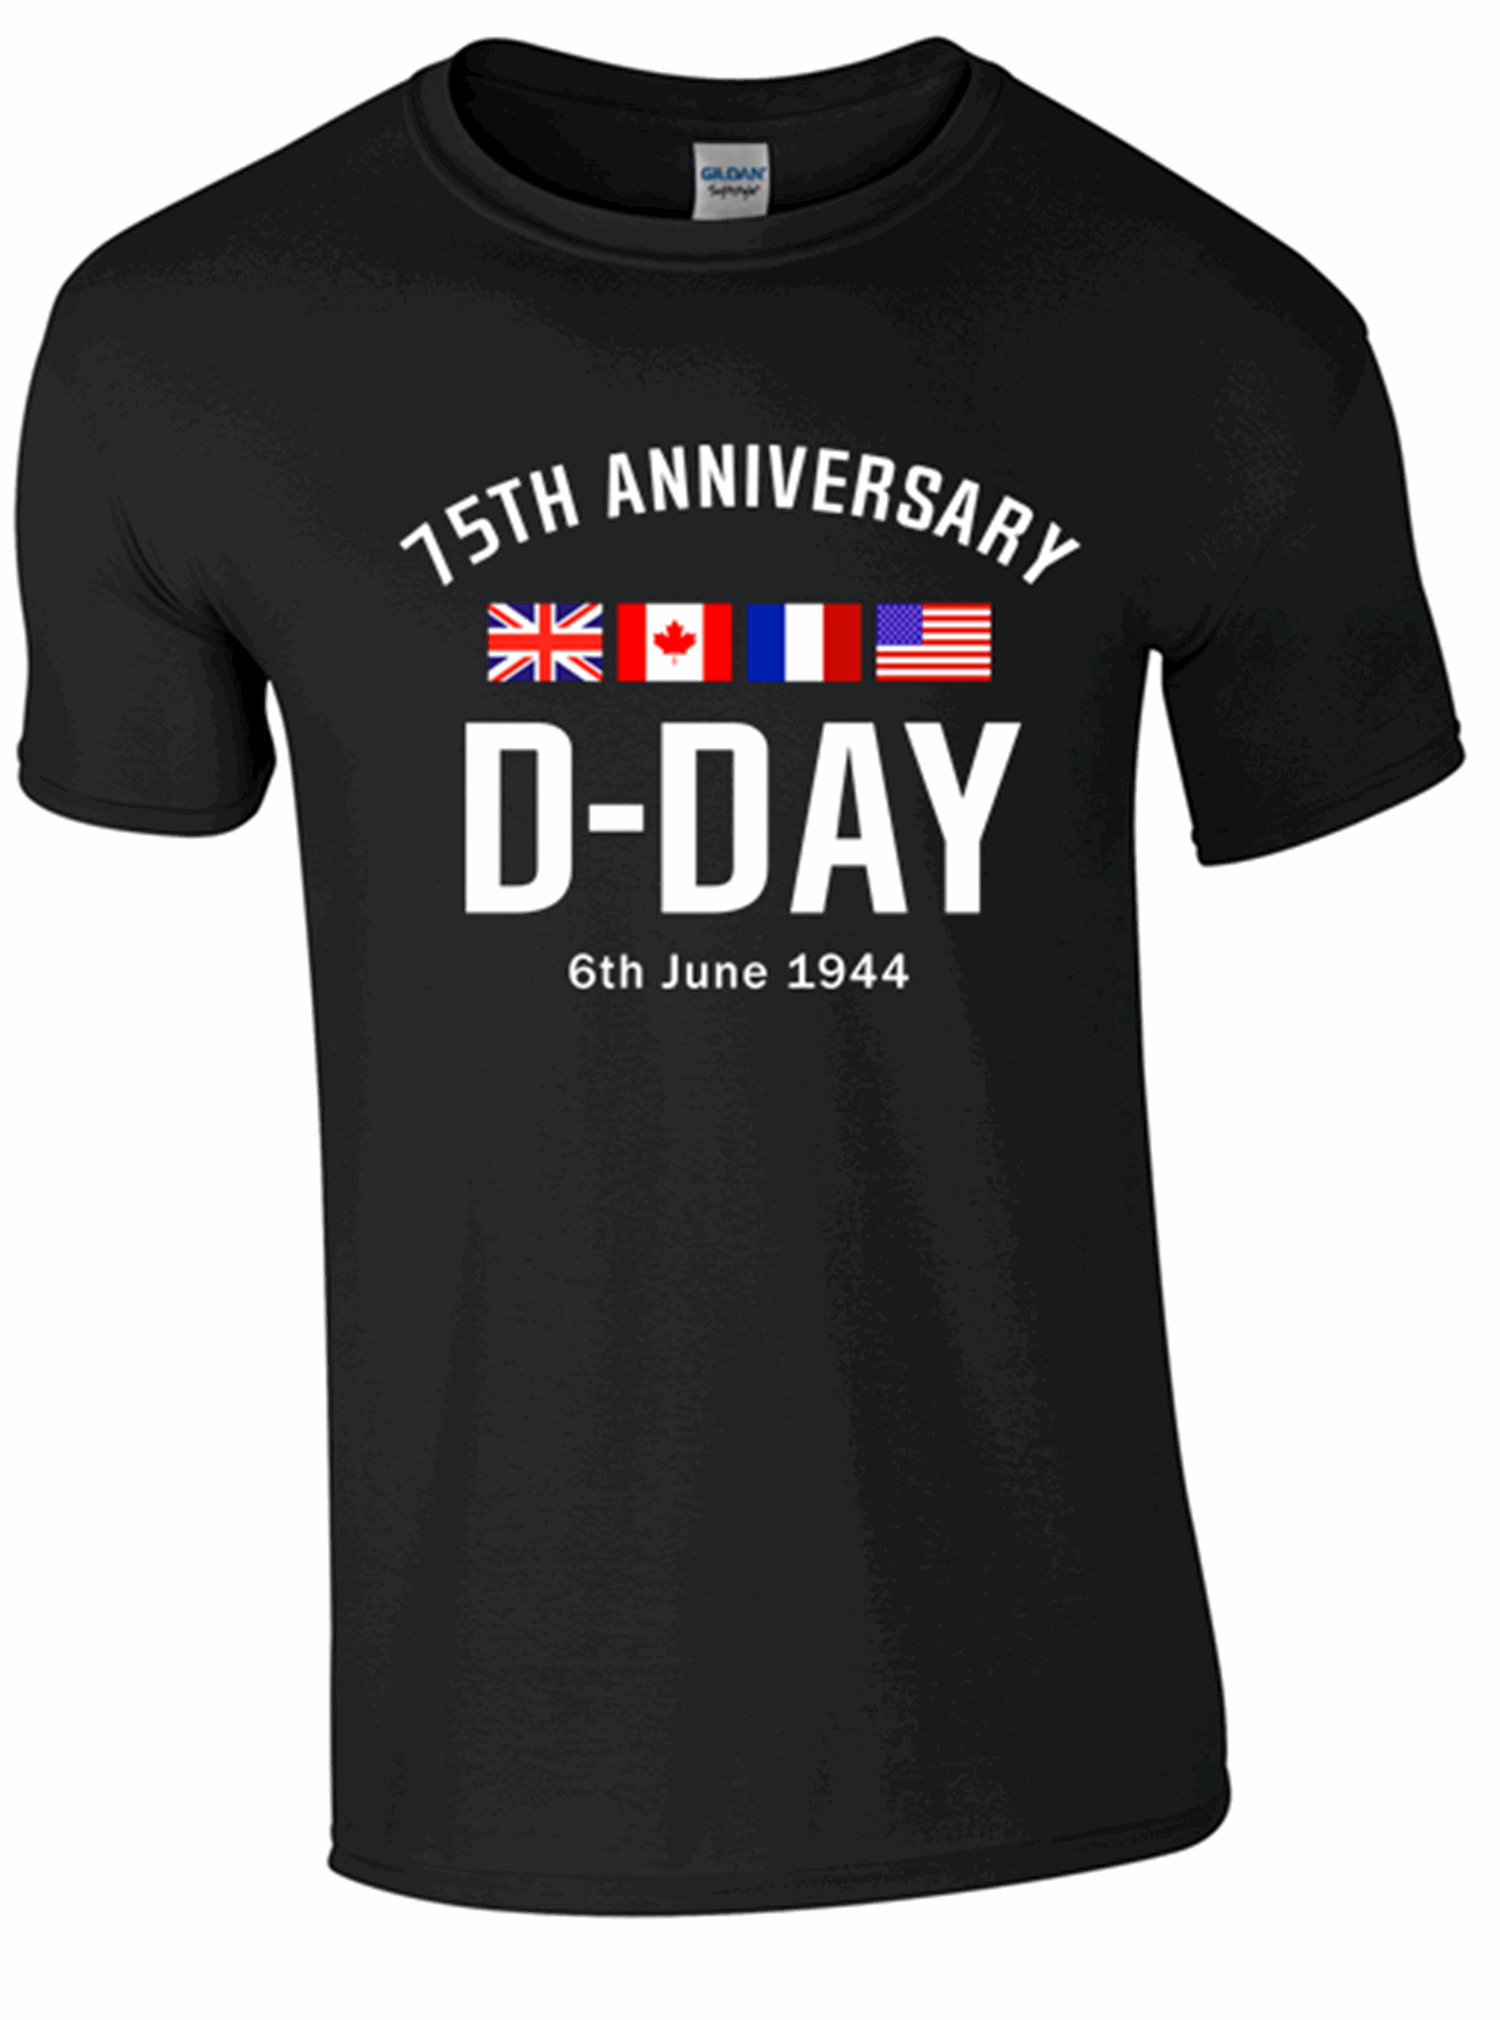 D-Day 75th Anniversary T-Shirt - Army 1157 Kit  Veterans Owned Business